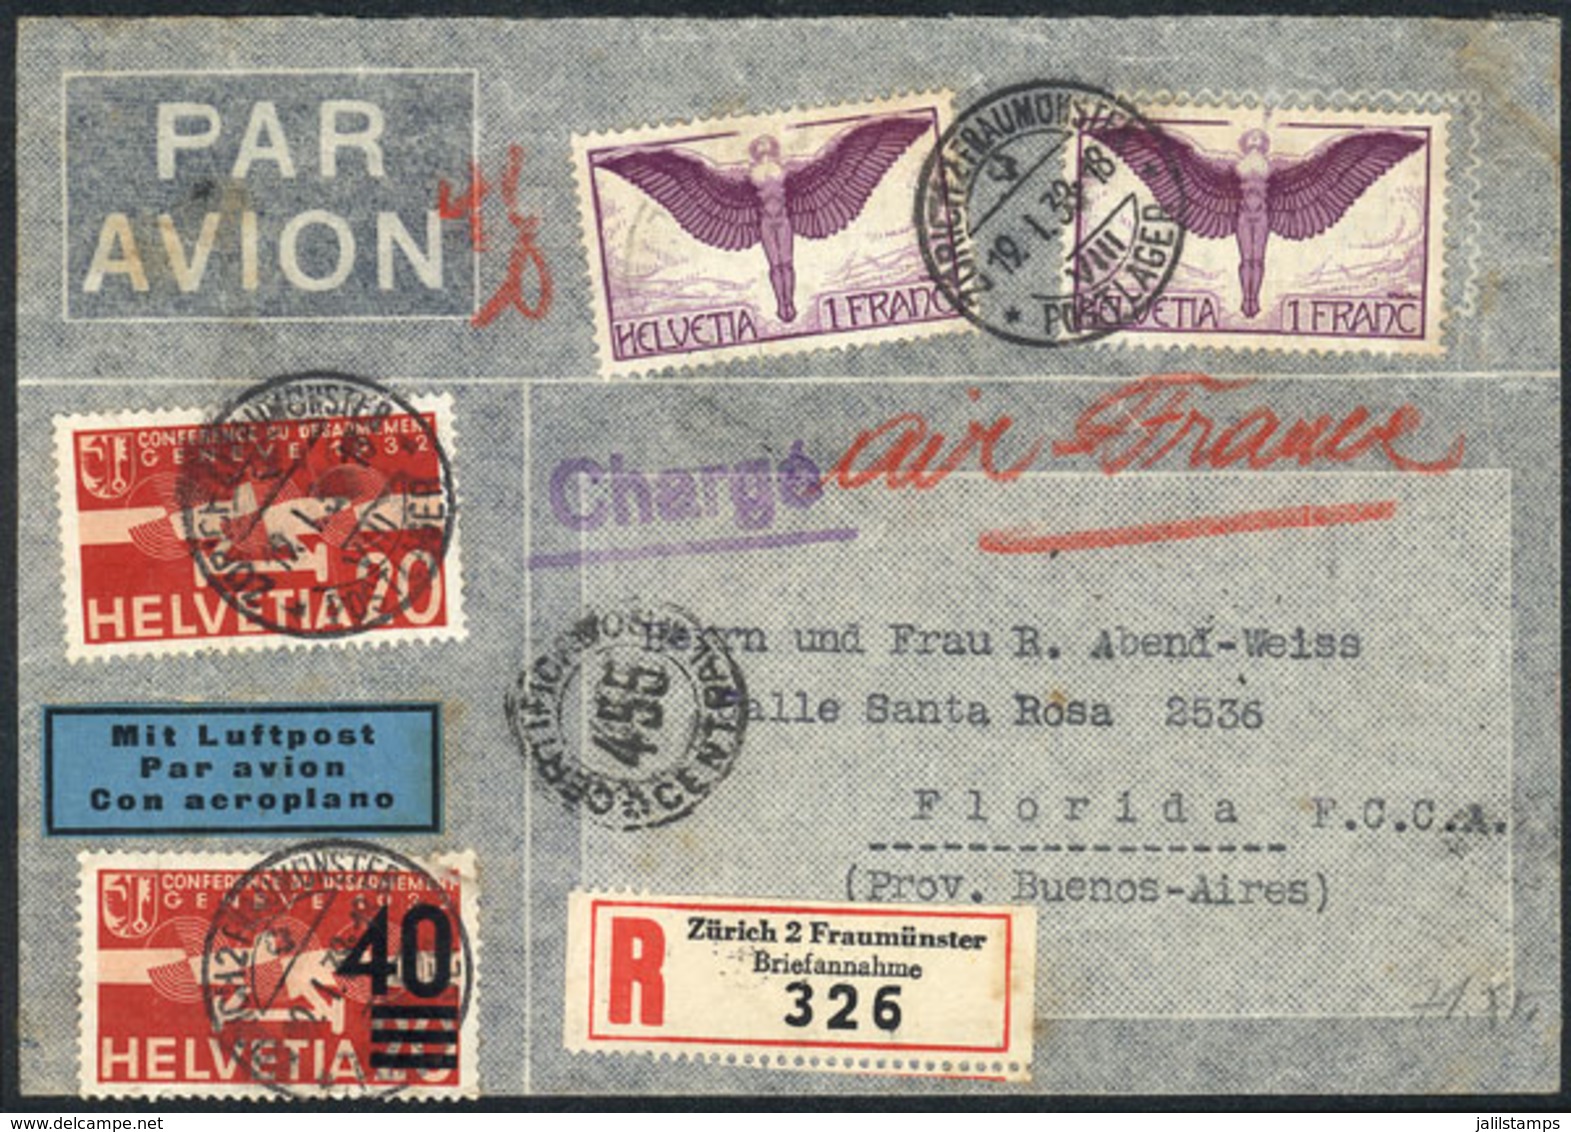 SWITZERLAND: Registered Airmail Cover With Nice Postage Of 2.60Fr., Sent From Zürich To Argentina On 19/JA/1938 Via Air  - Covers & Documents